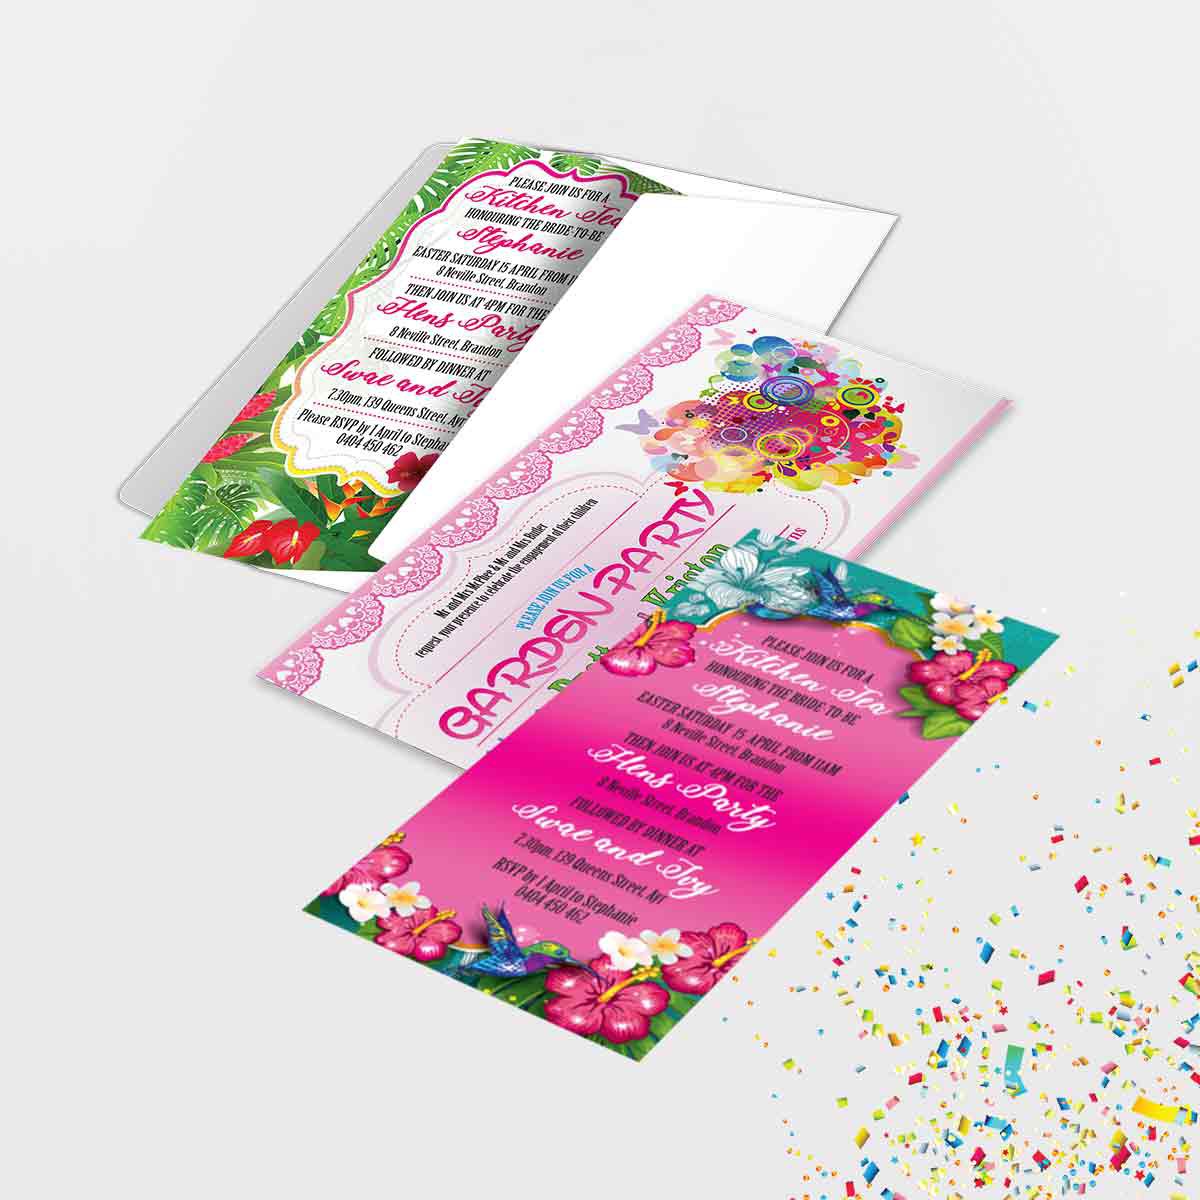 Invitations and greeting cards designed by Linda Butler of GGA Graphics